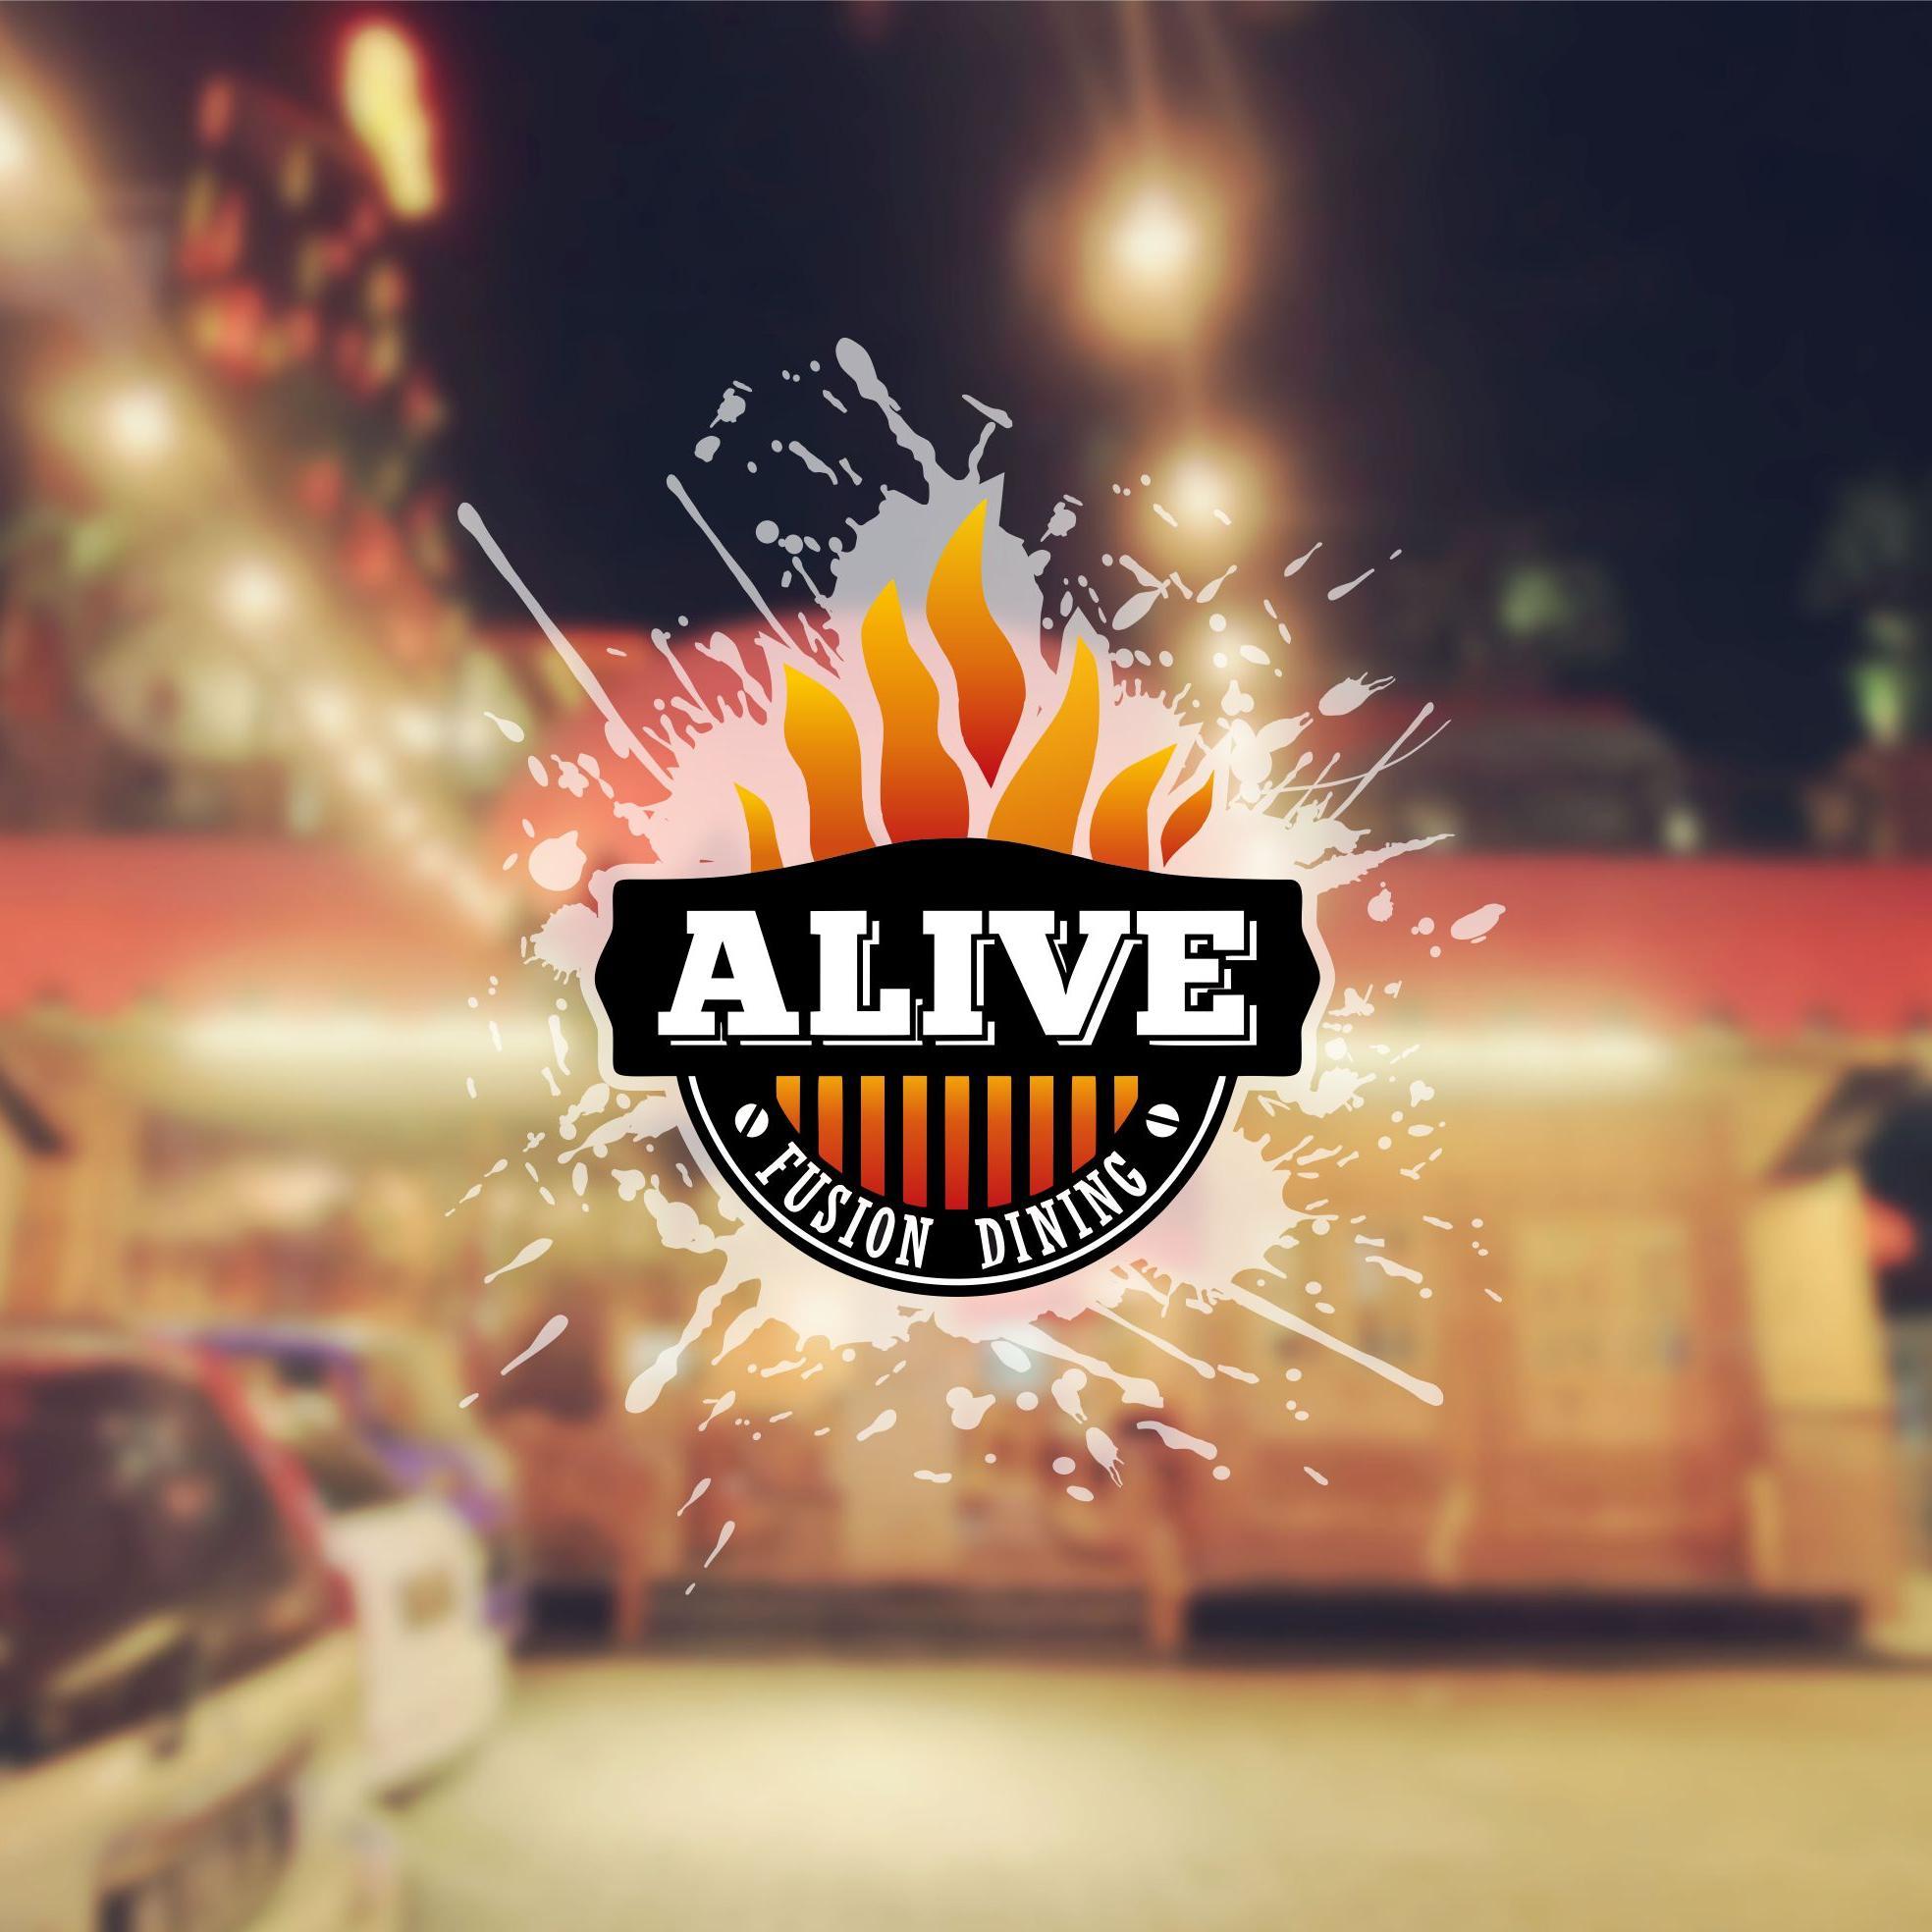 ALIVE Fusion Dining